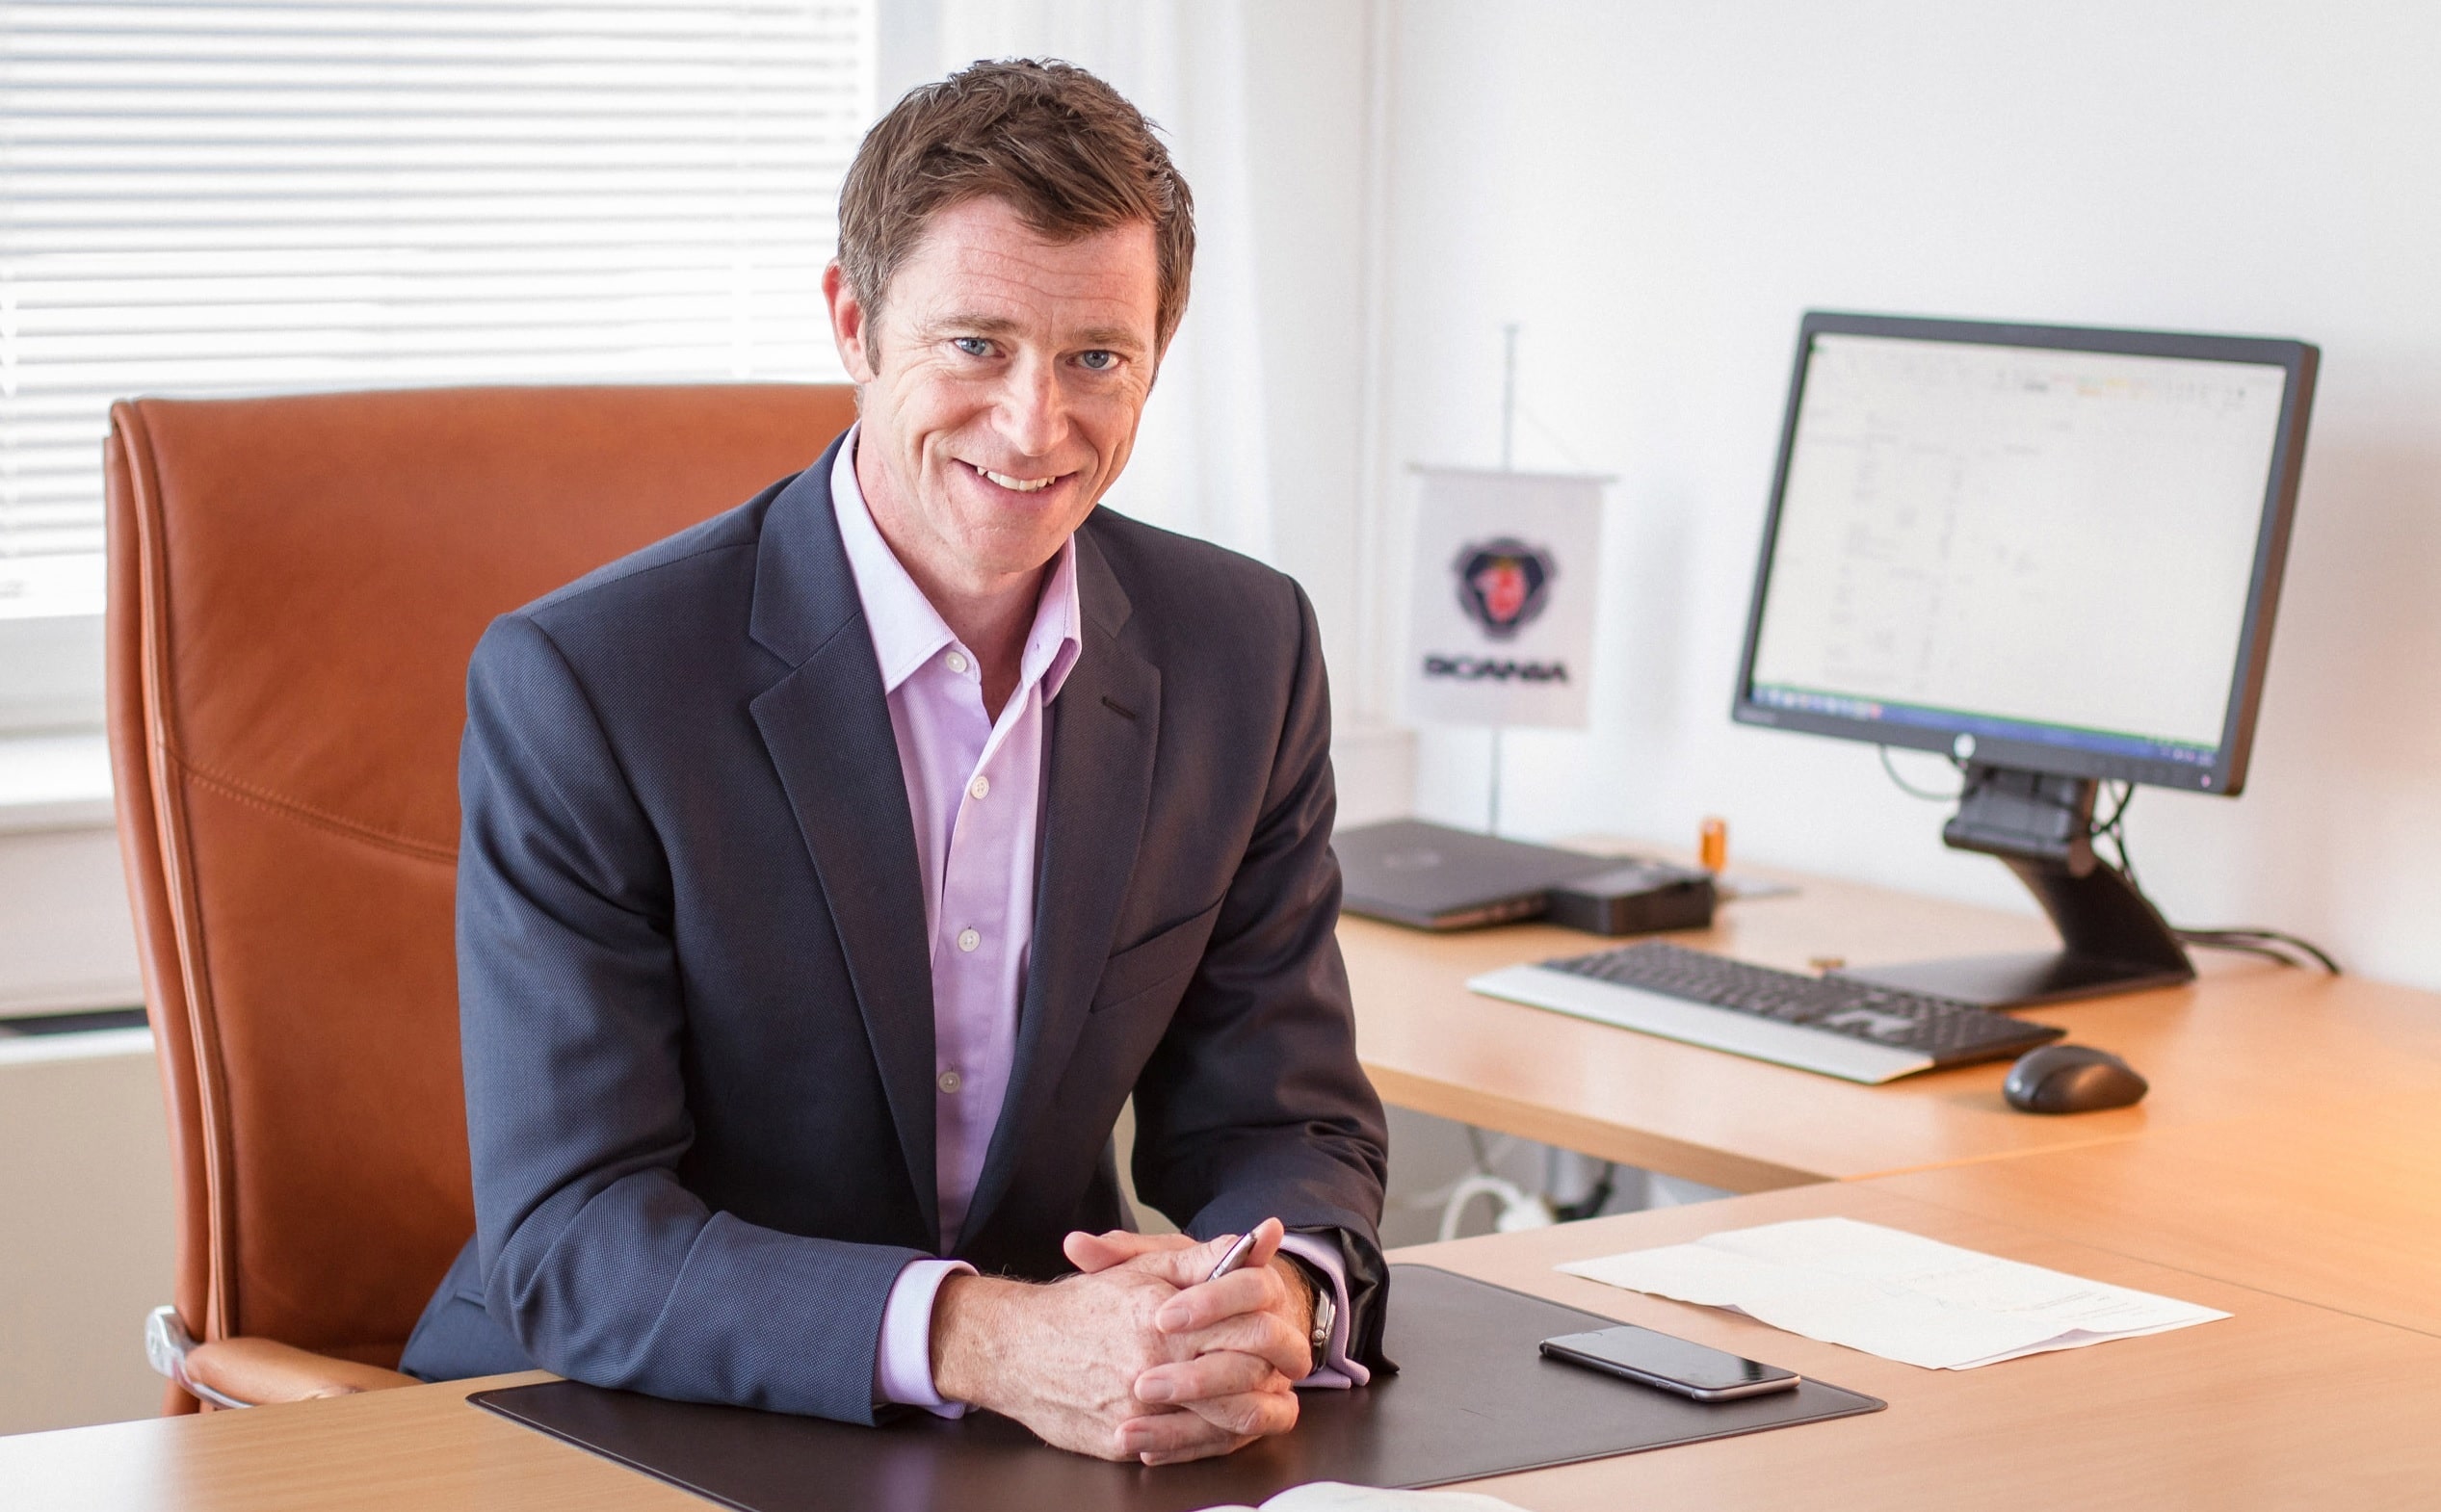 James Armstrong, Scania (Great Britain) Managing Director